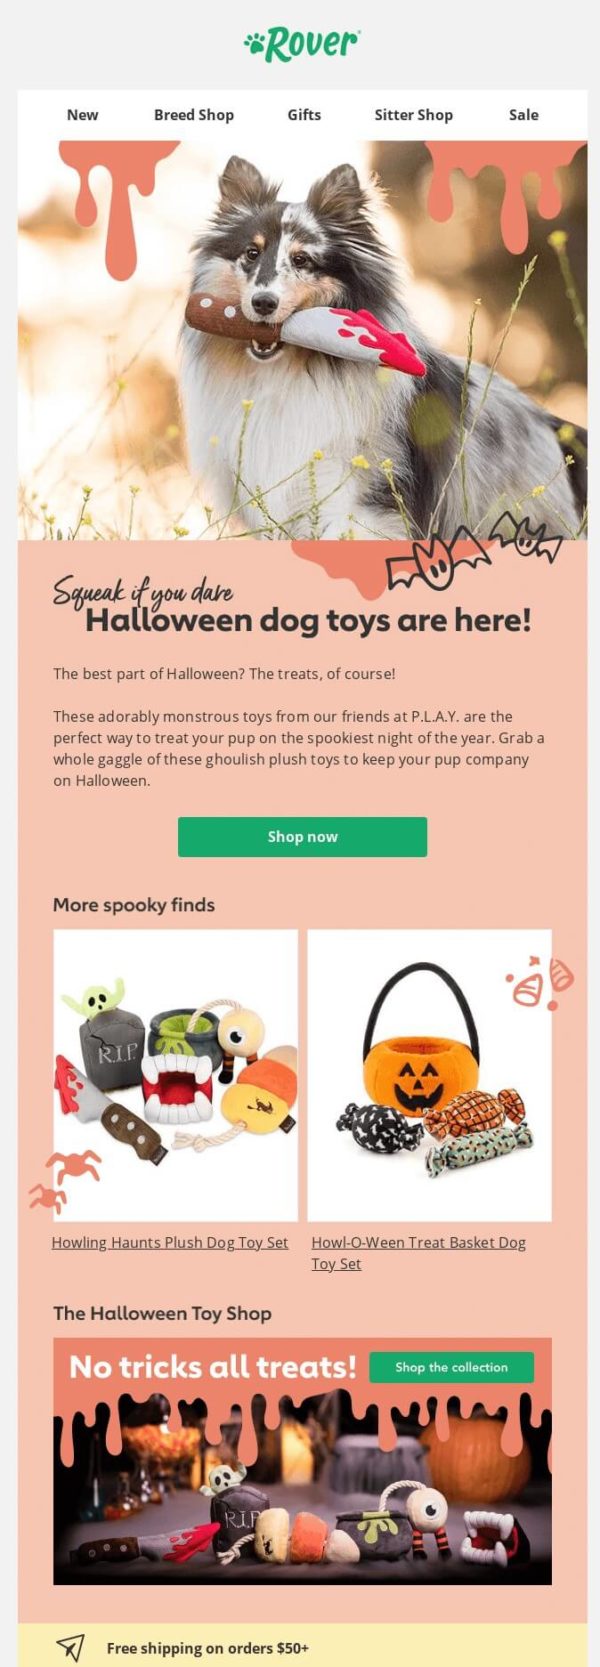 Halloween email campaign by Rover